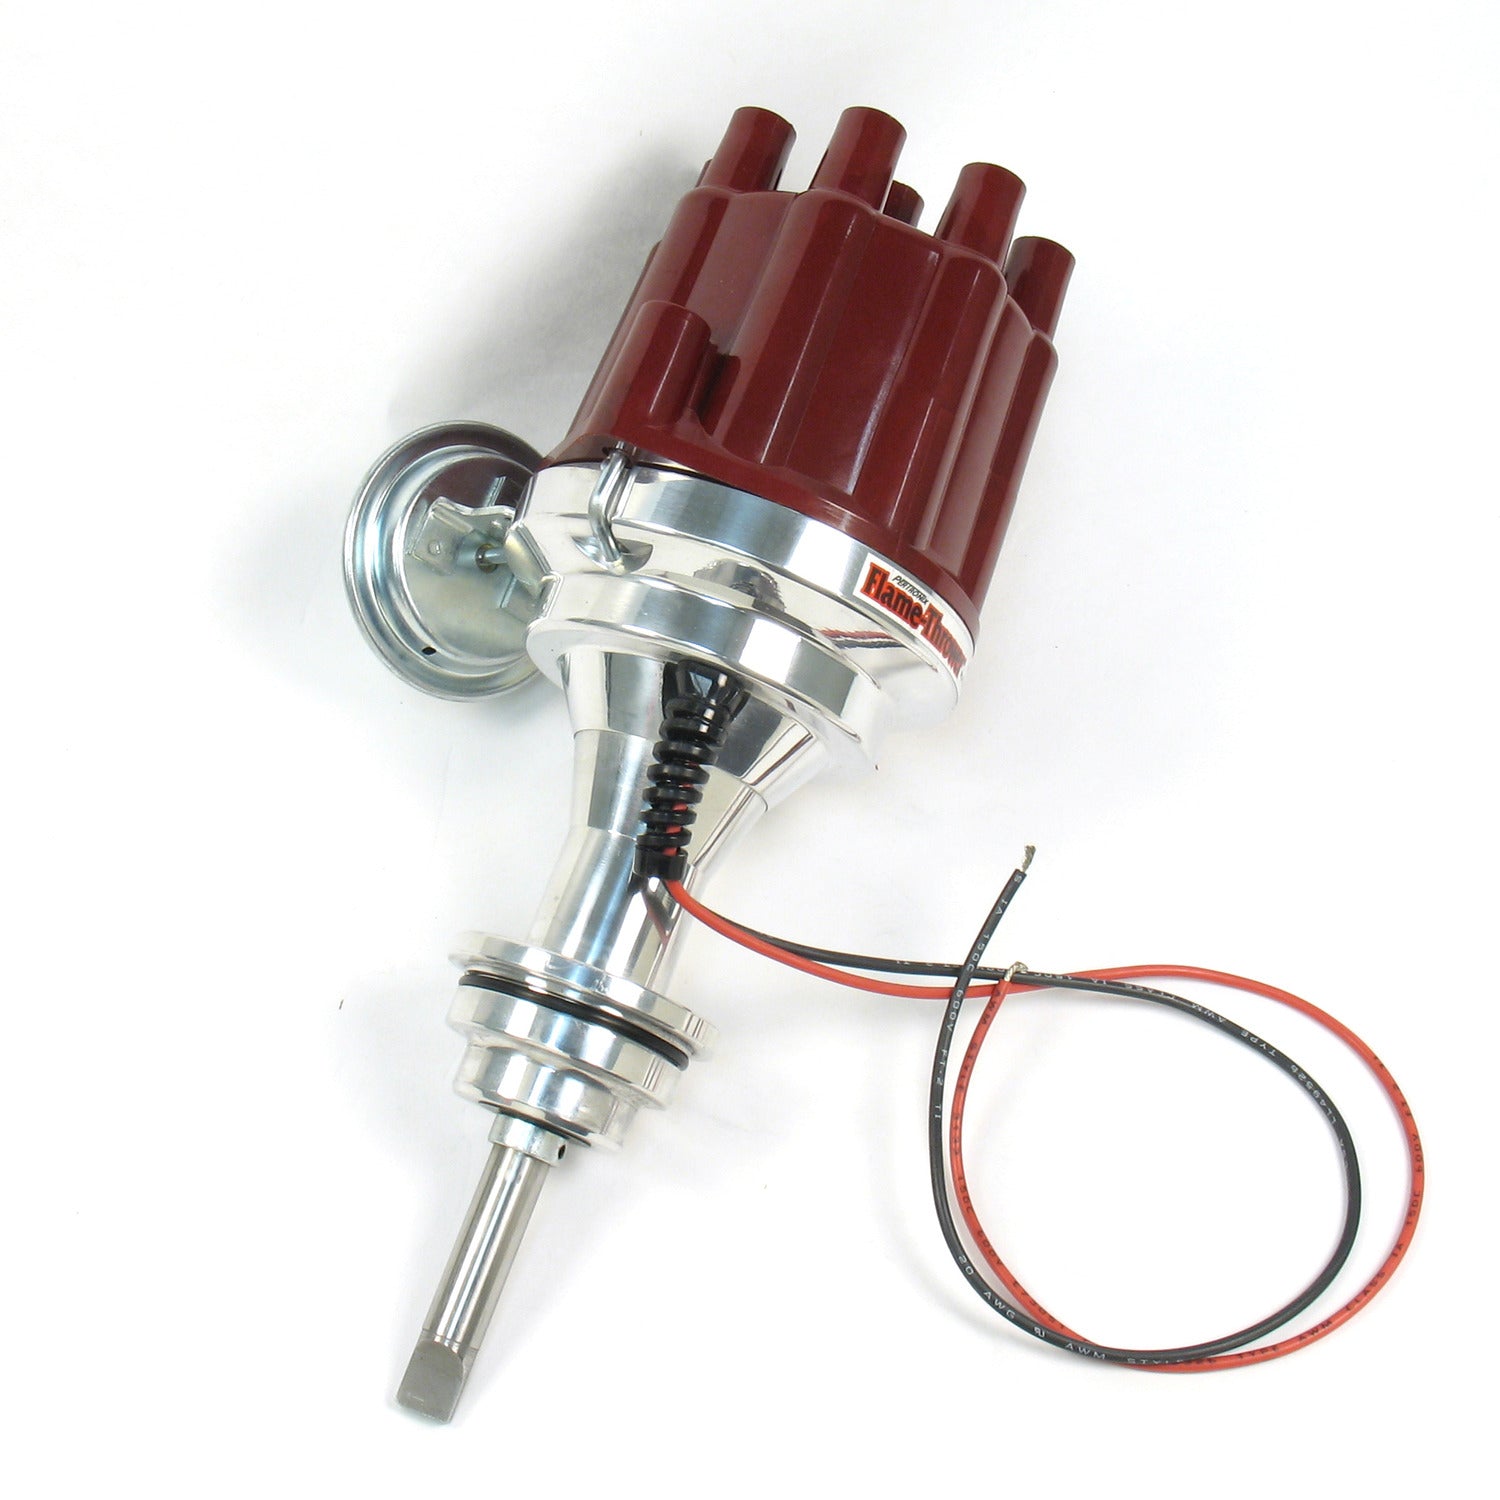 PerTronix D142701 Flame-Thrower Electronic Distributor Billet Chrysler/Dodge/Plymouth 383-400 Plug and Play with Ignitor II Technology Vacuum Advance Red Cap